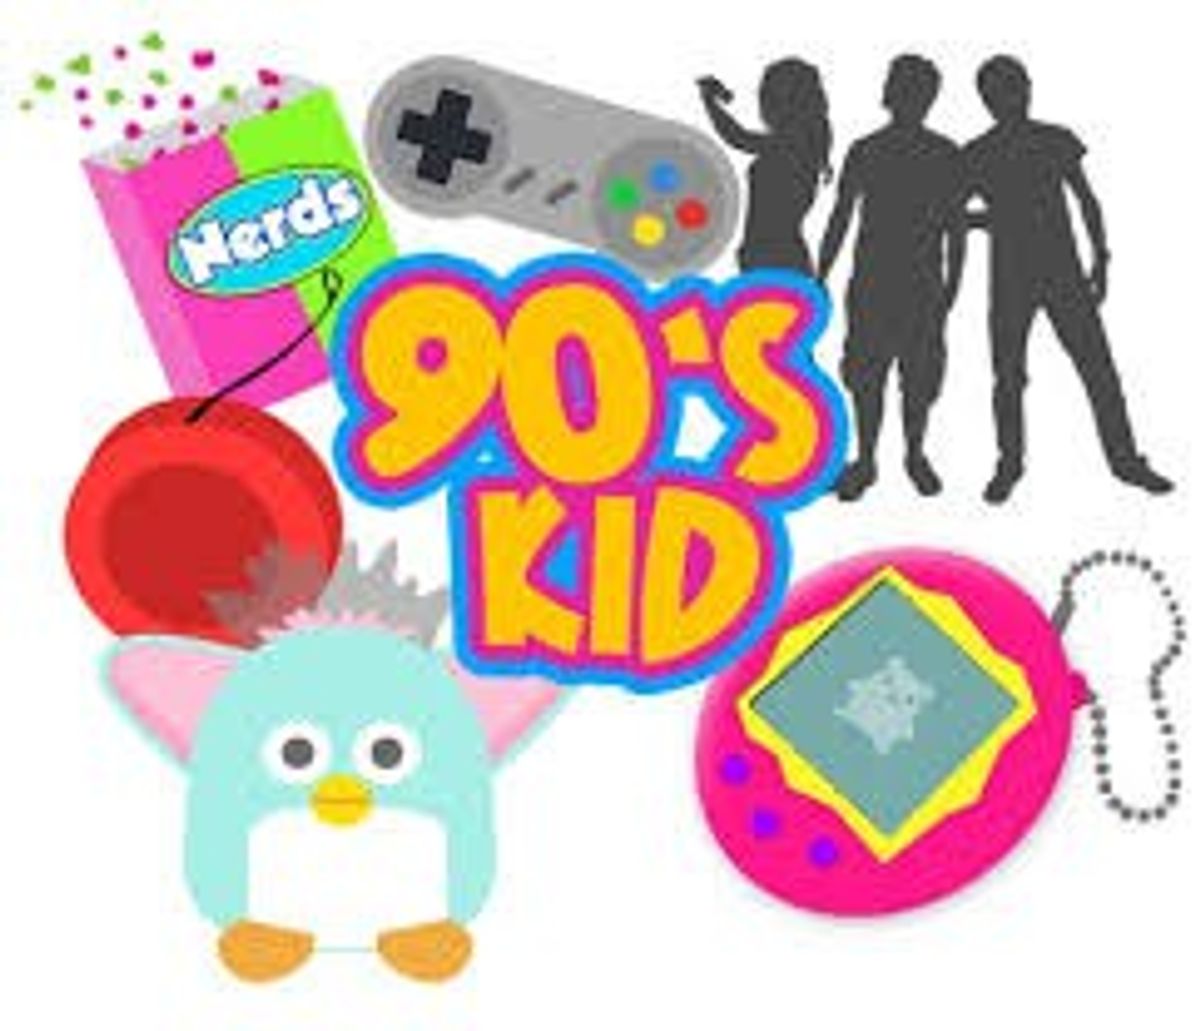 Why Are '90s Kids So Obsessed With Nostalgia?